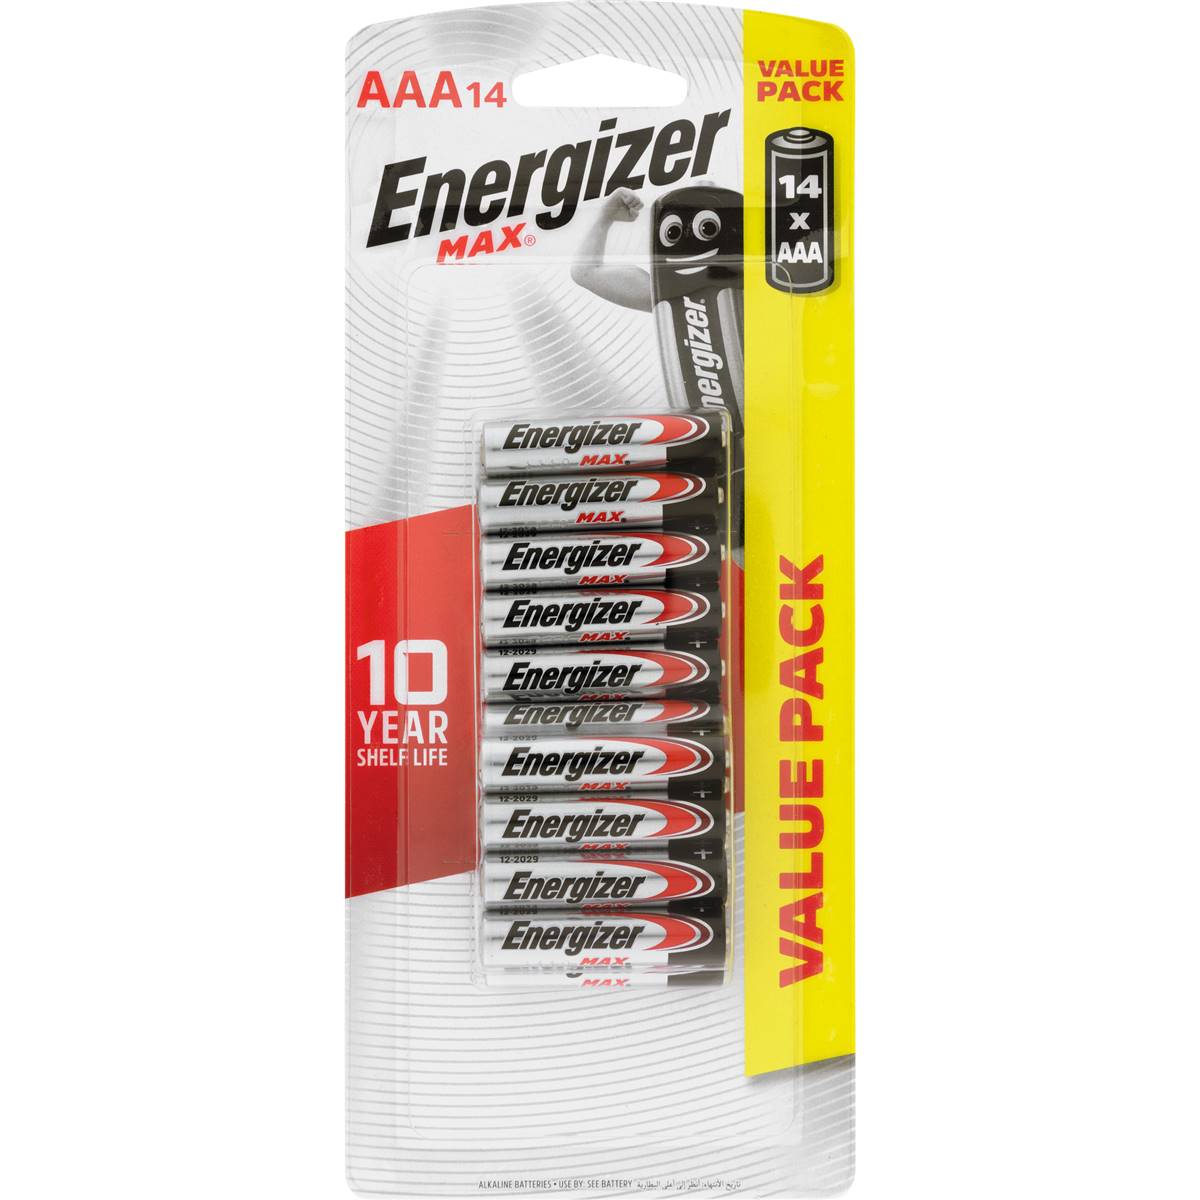 Energizer Max AAA Batteries 14 Pack